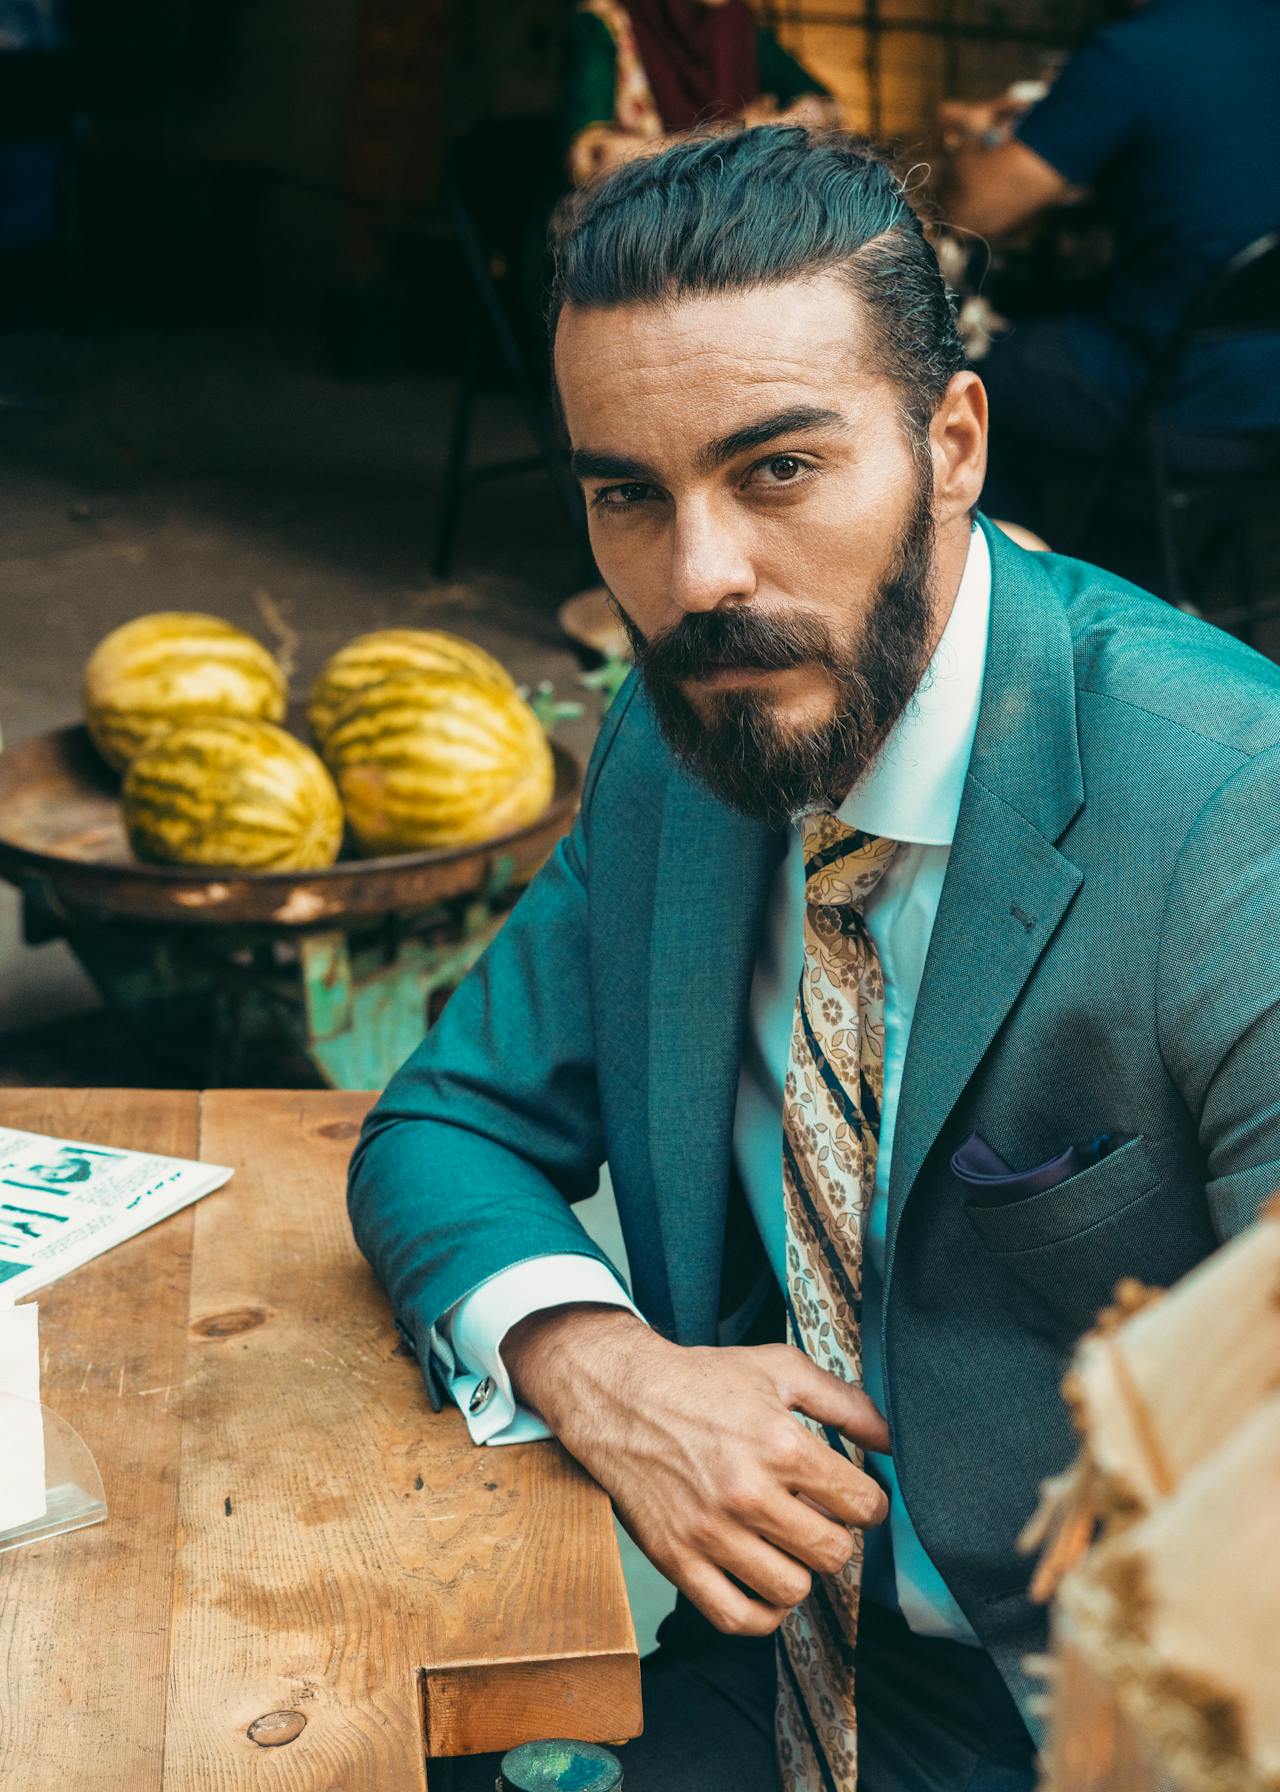 Stylish man with a neat beard and blue suit sitting confidently at a rustic table